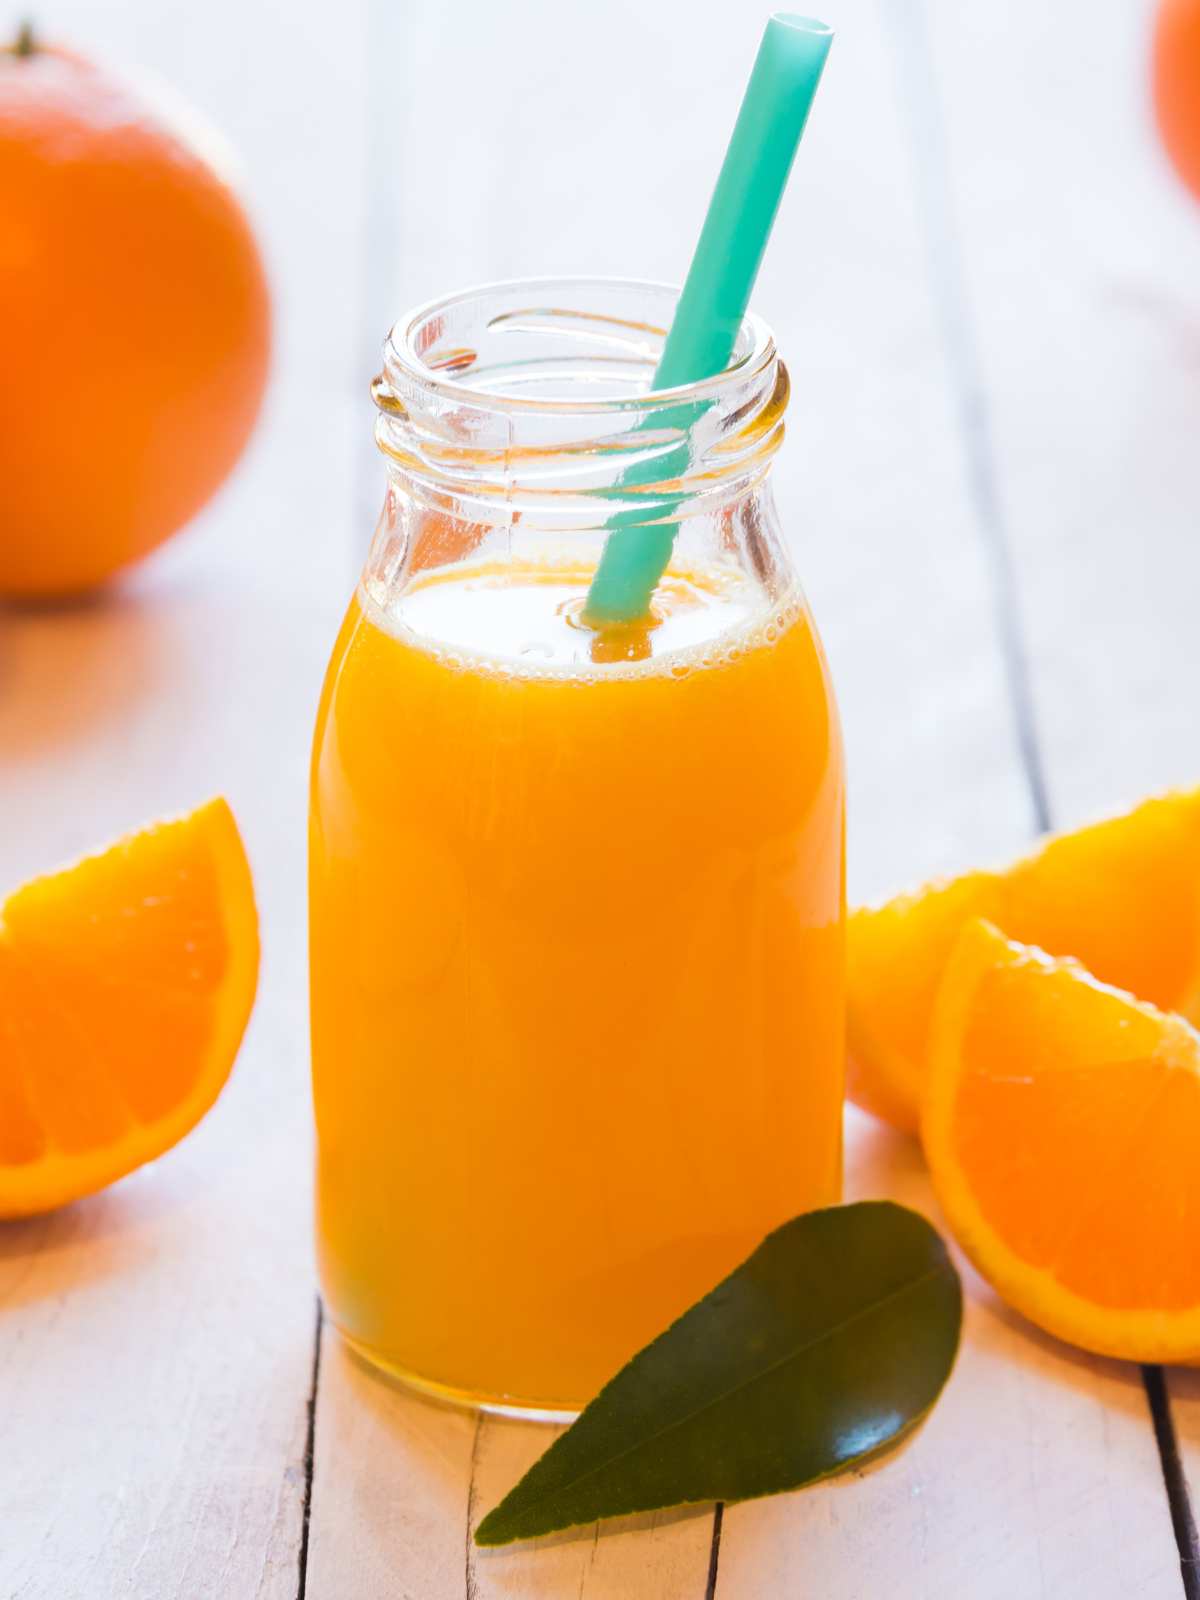 A bottle of freshly squeezed orange juice with a straw next to slices of oranges and an orange leaf.